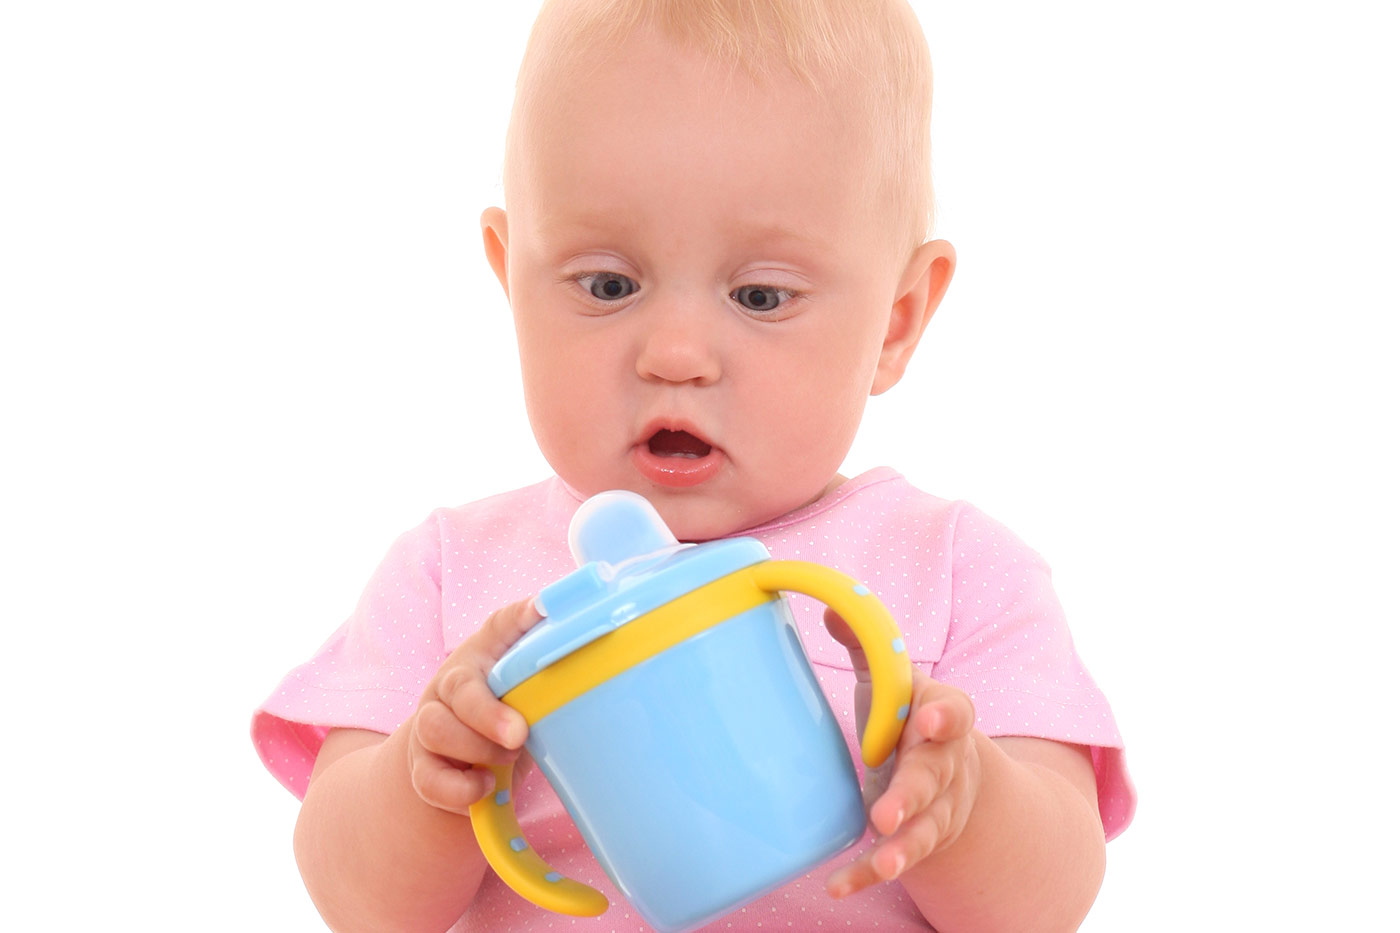 Tips for transitioning away from a sippy cup - Ovia Health